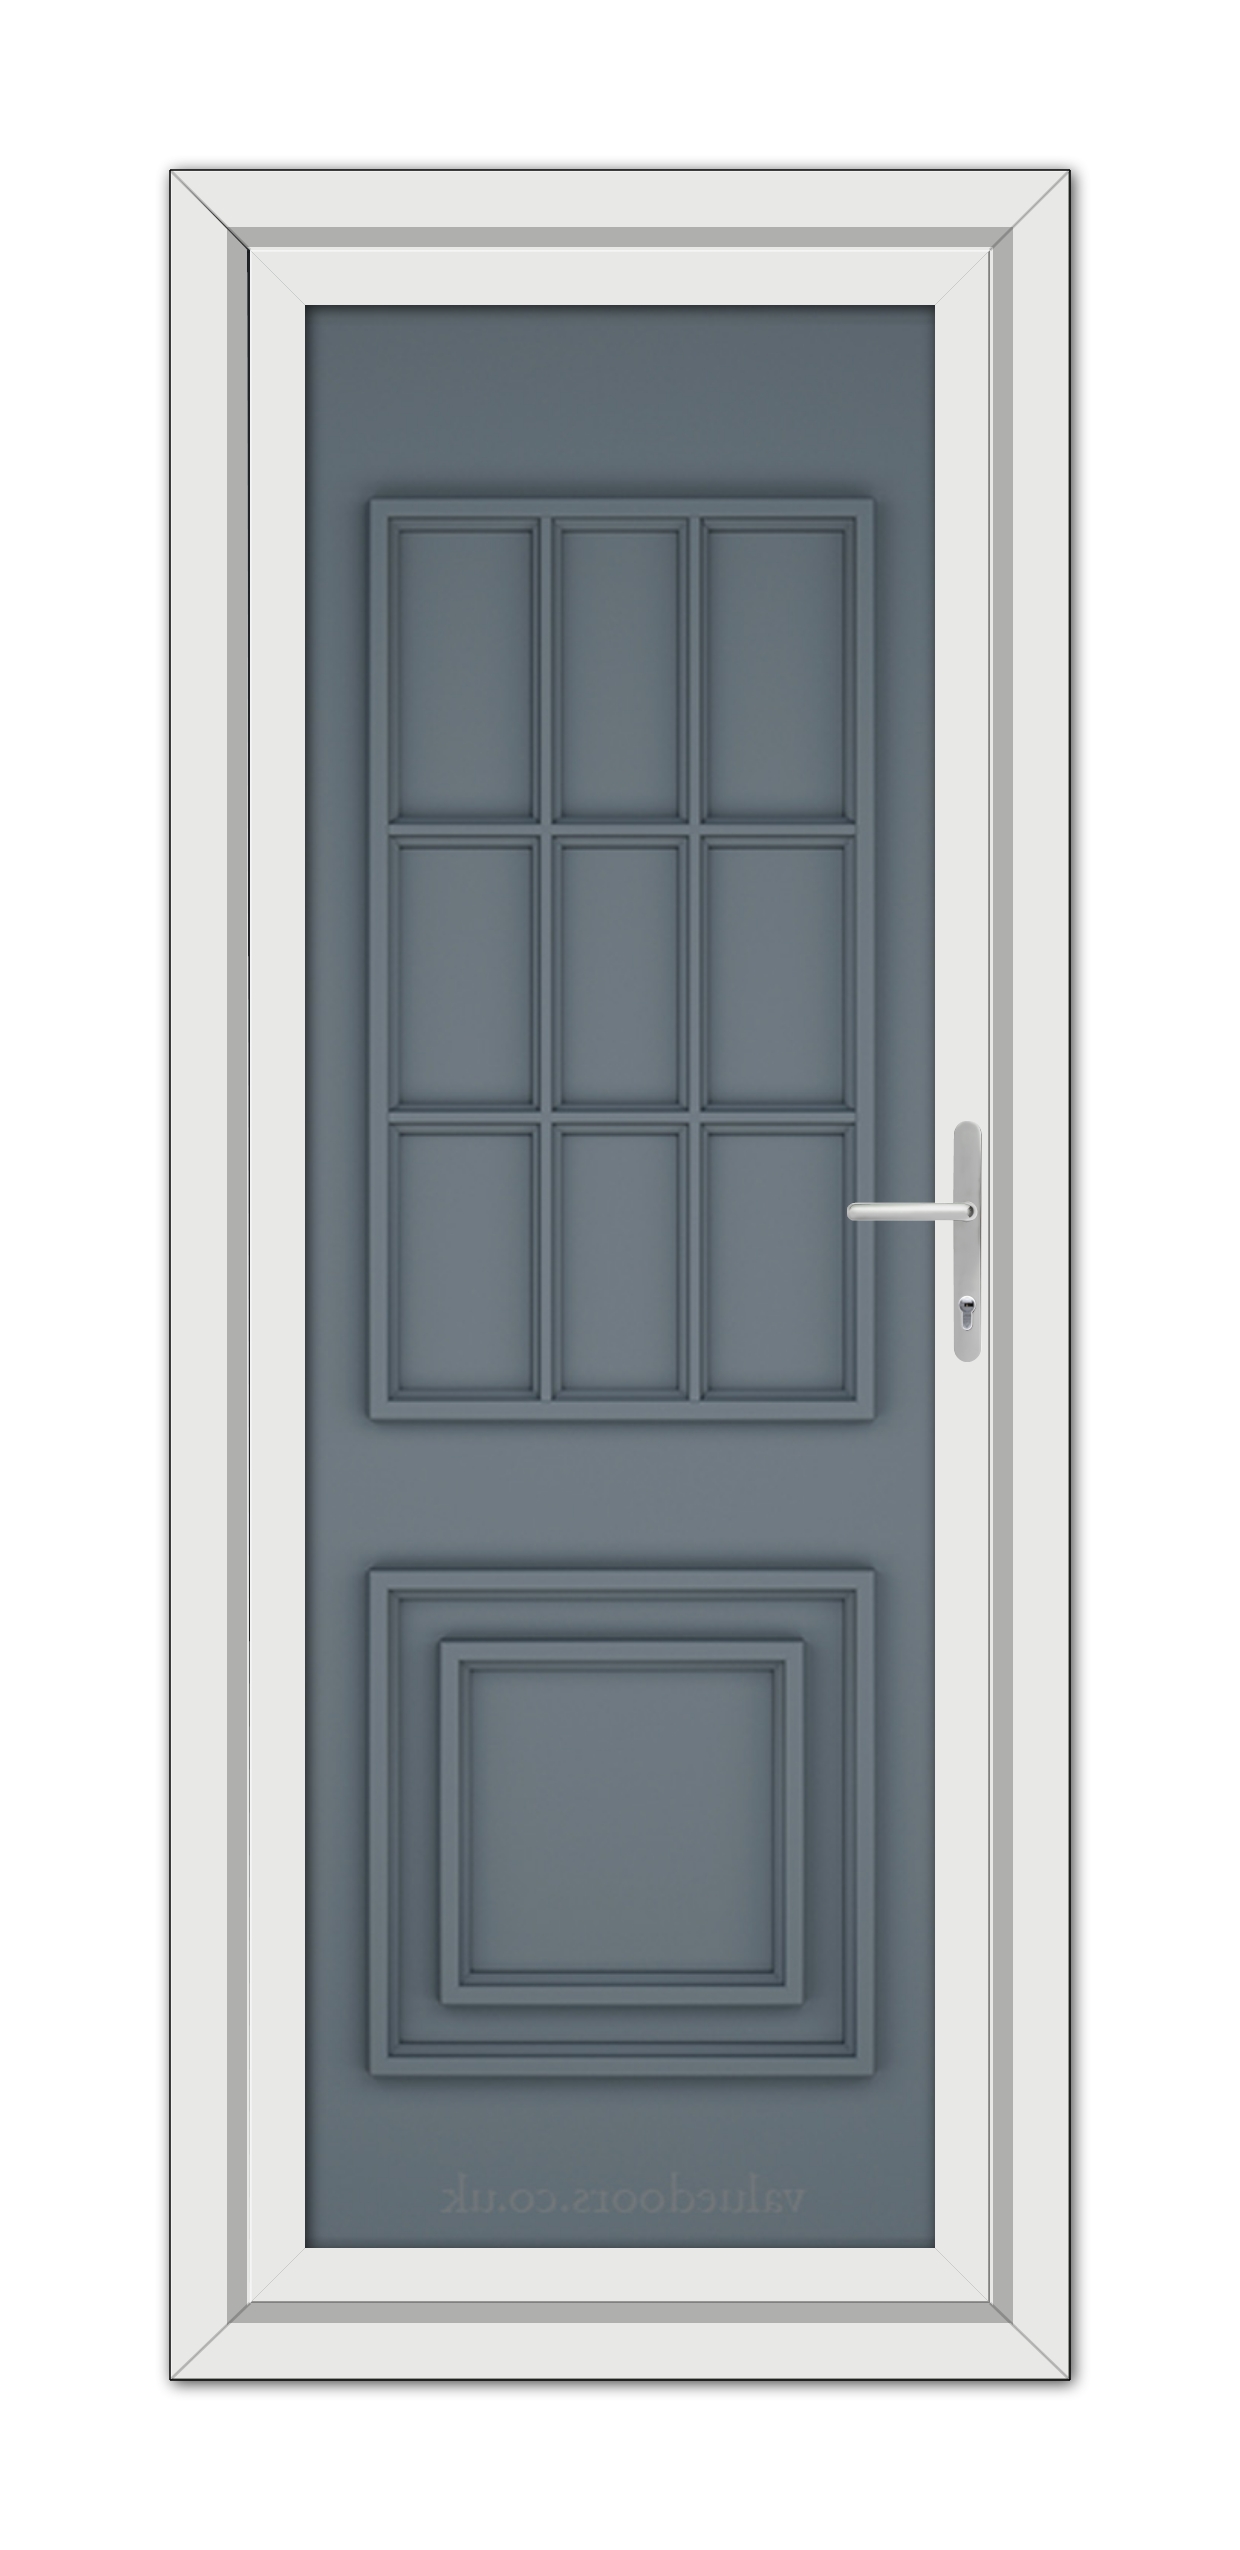 A Slate Grey Cambridge One Solid uPVC door with a white frame.